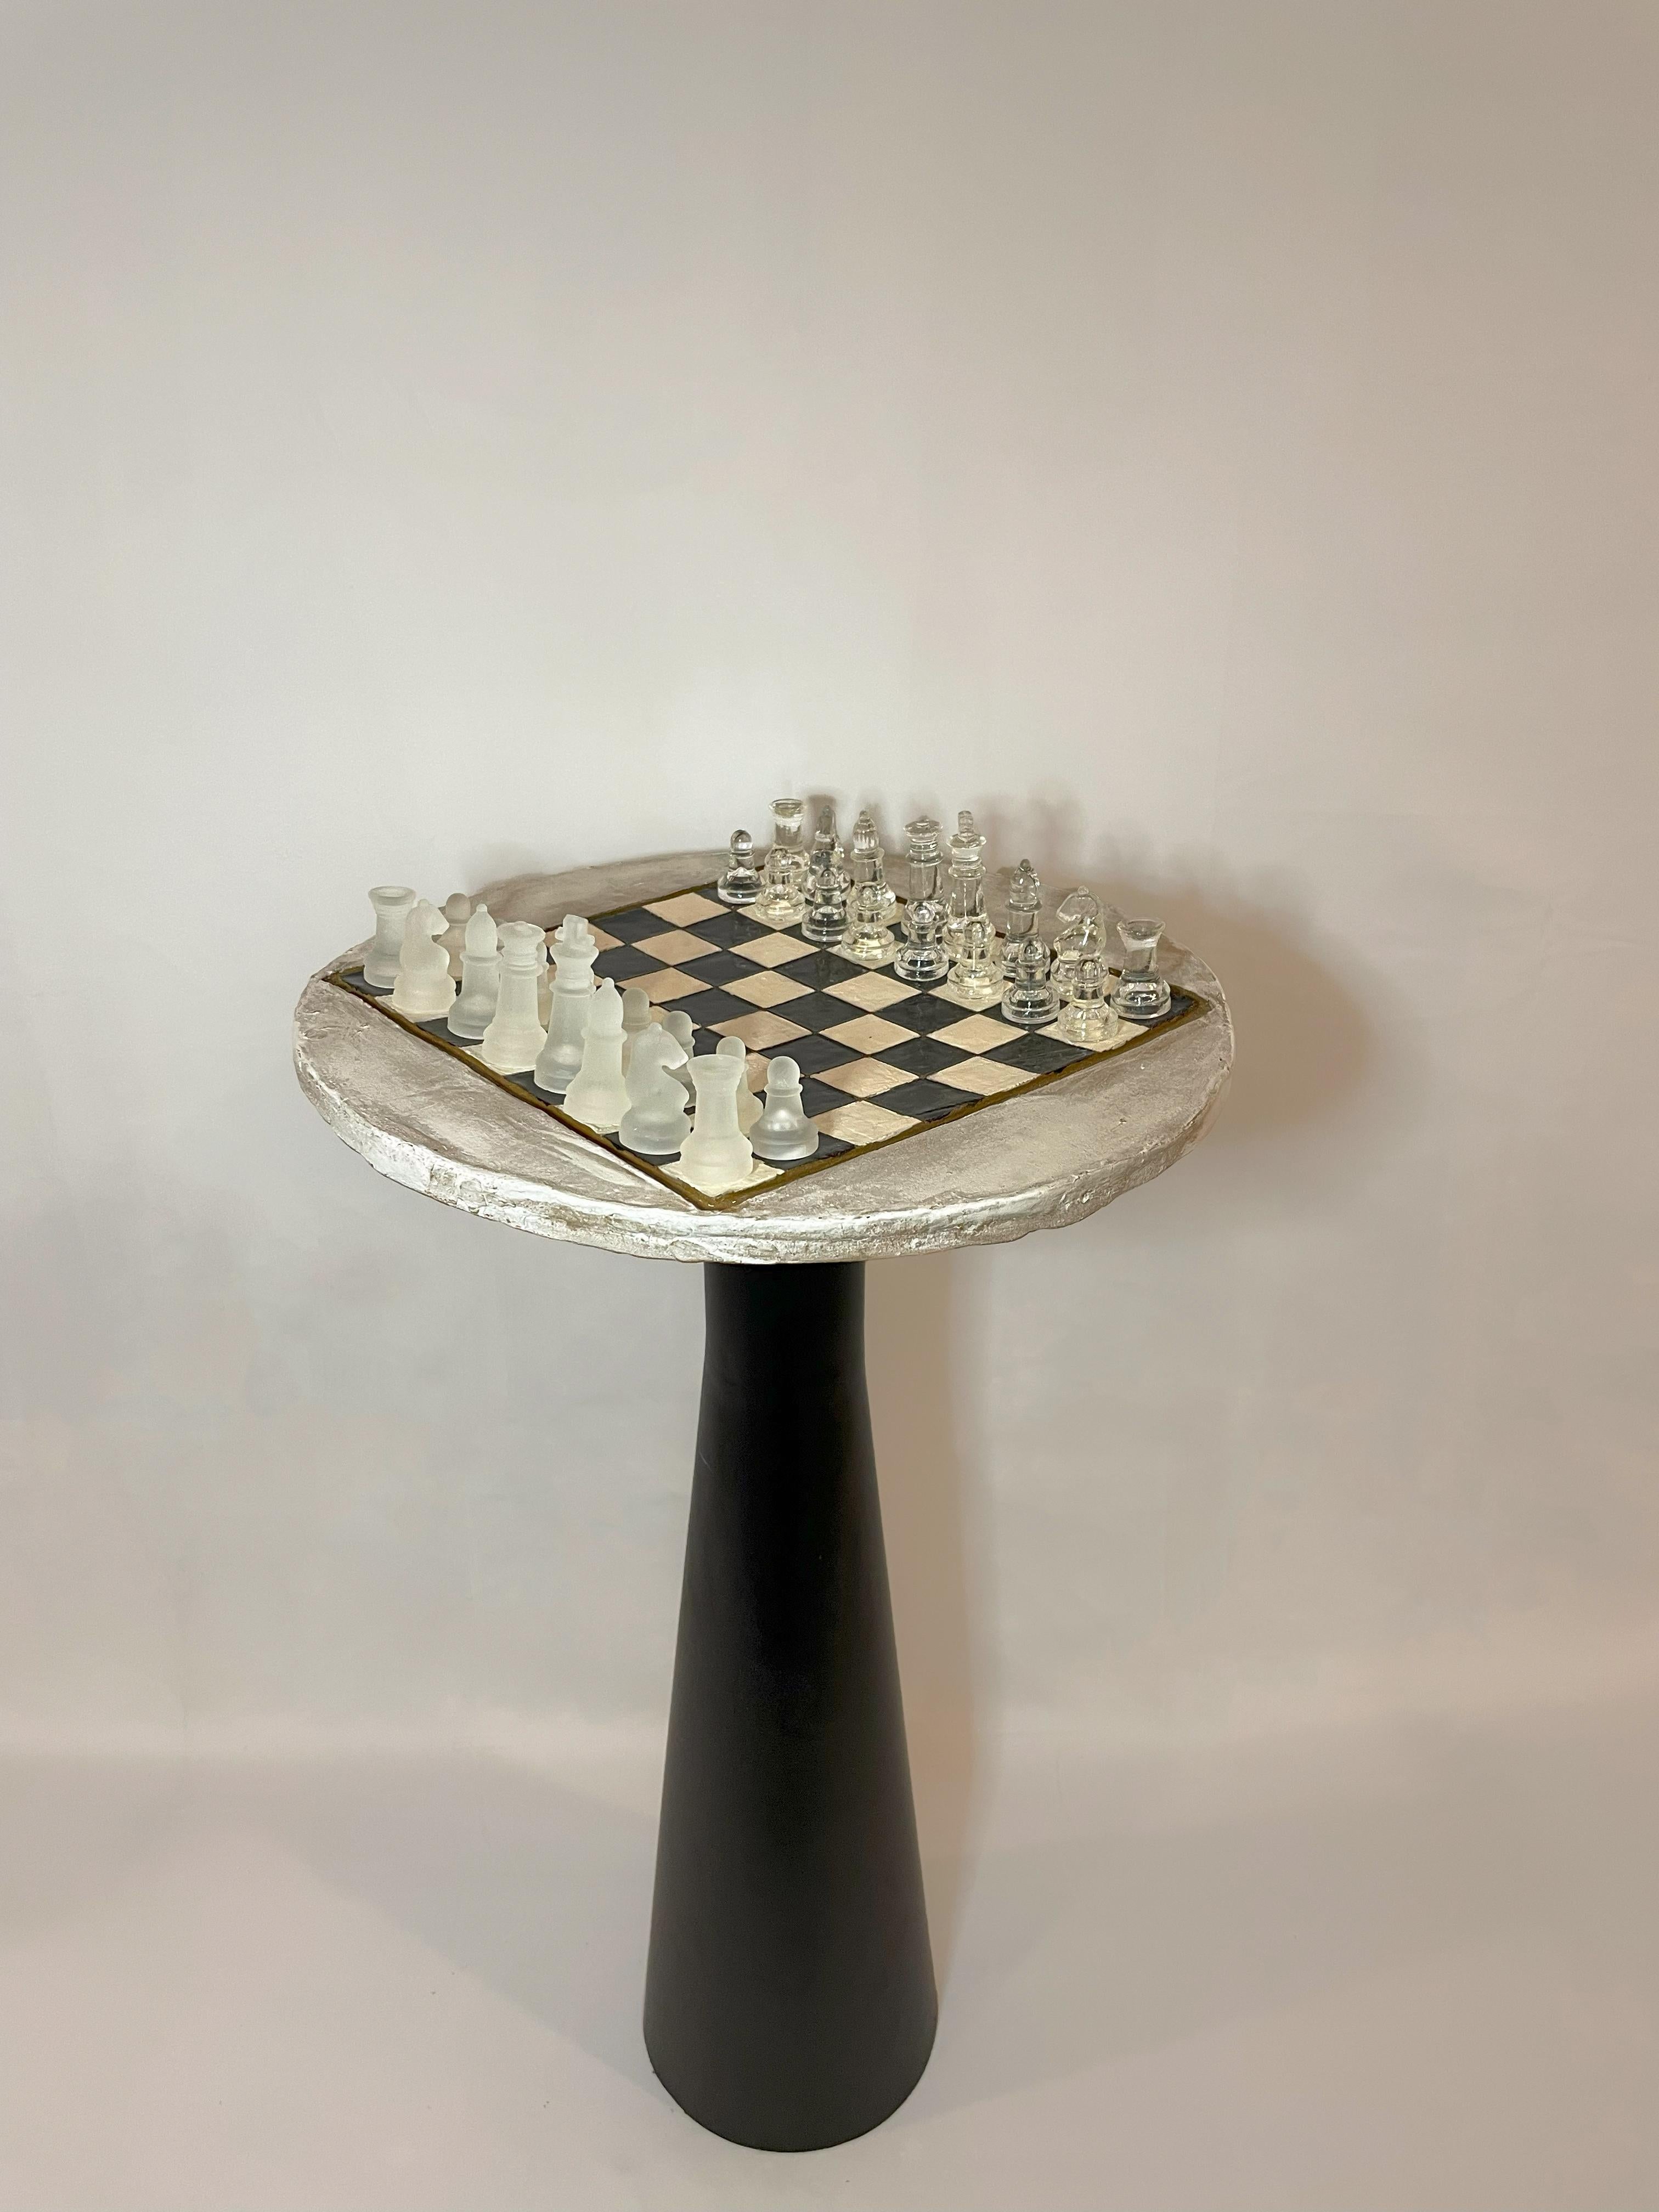 Contemporary Ceramic and Metal Chess Table